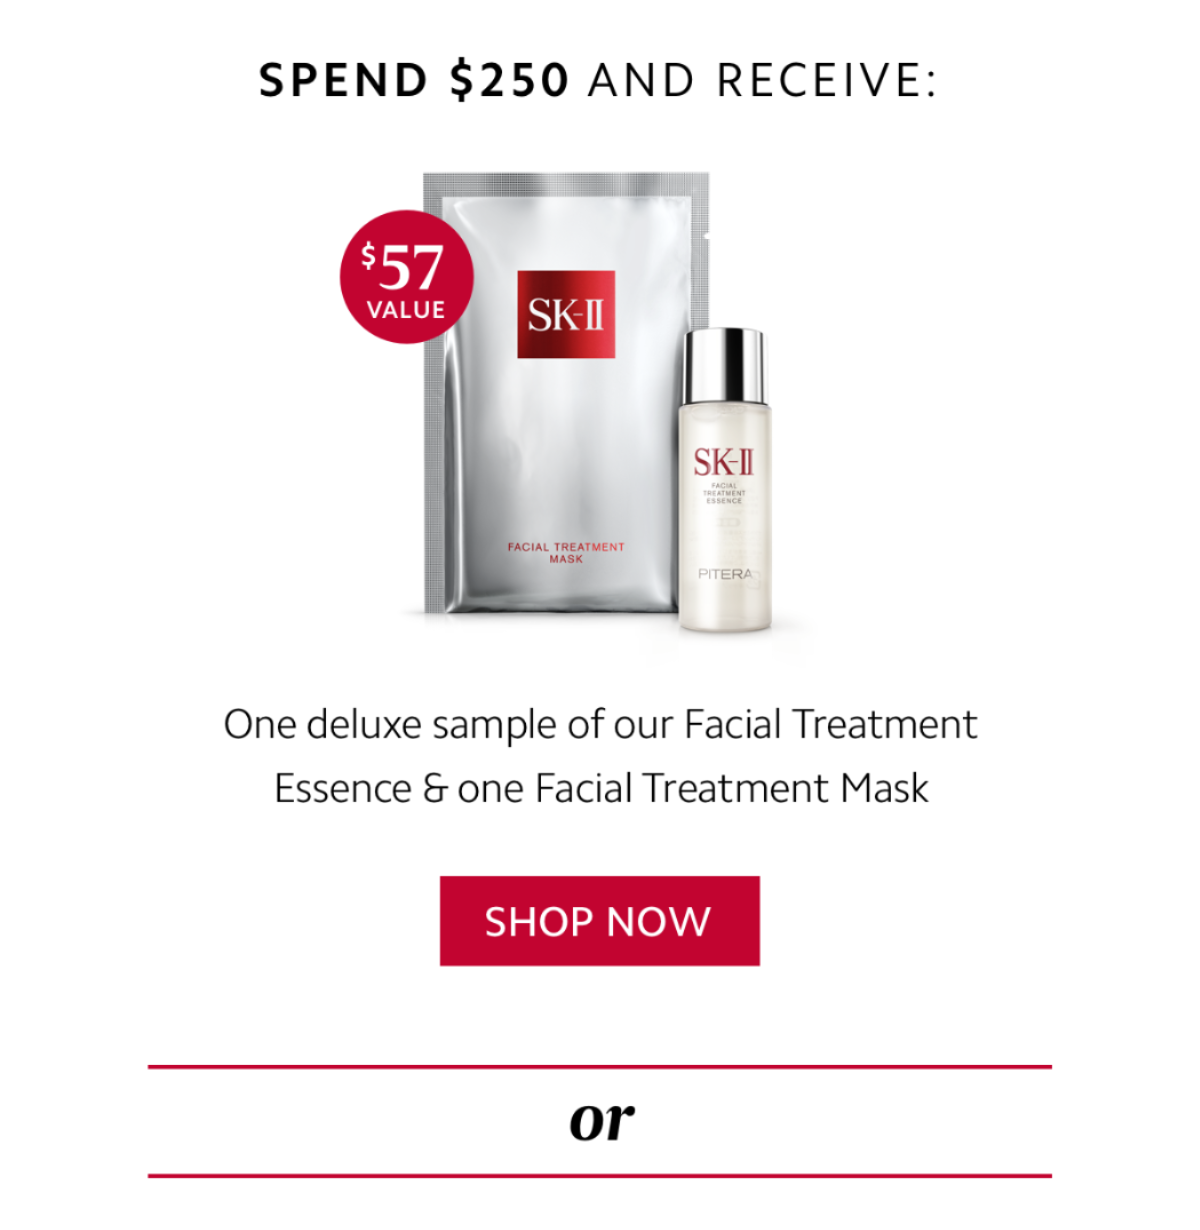 Spend $250 and receive: One deluxe sample of our Facial Treatment Essence & one Facial Treatment Mask ($57 value)